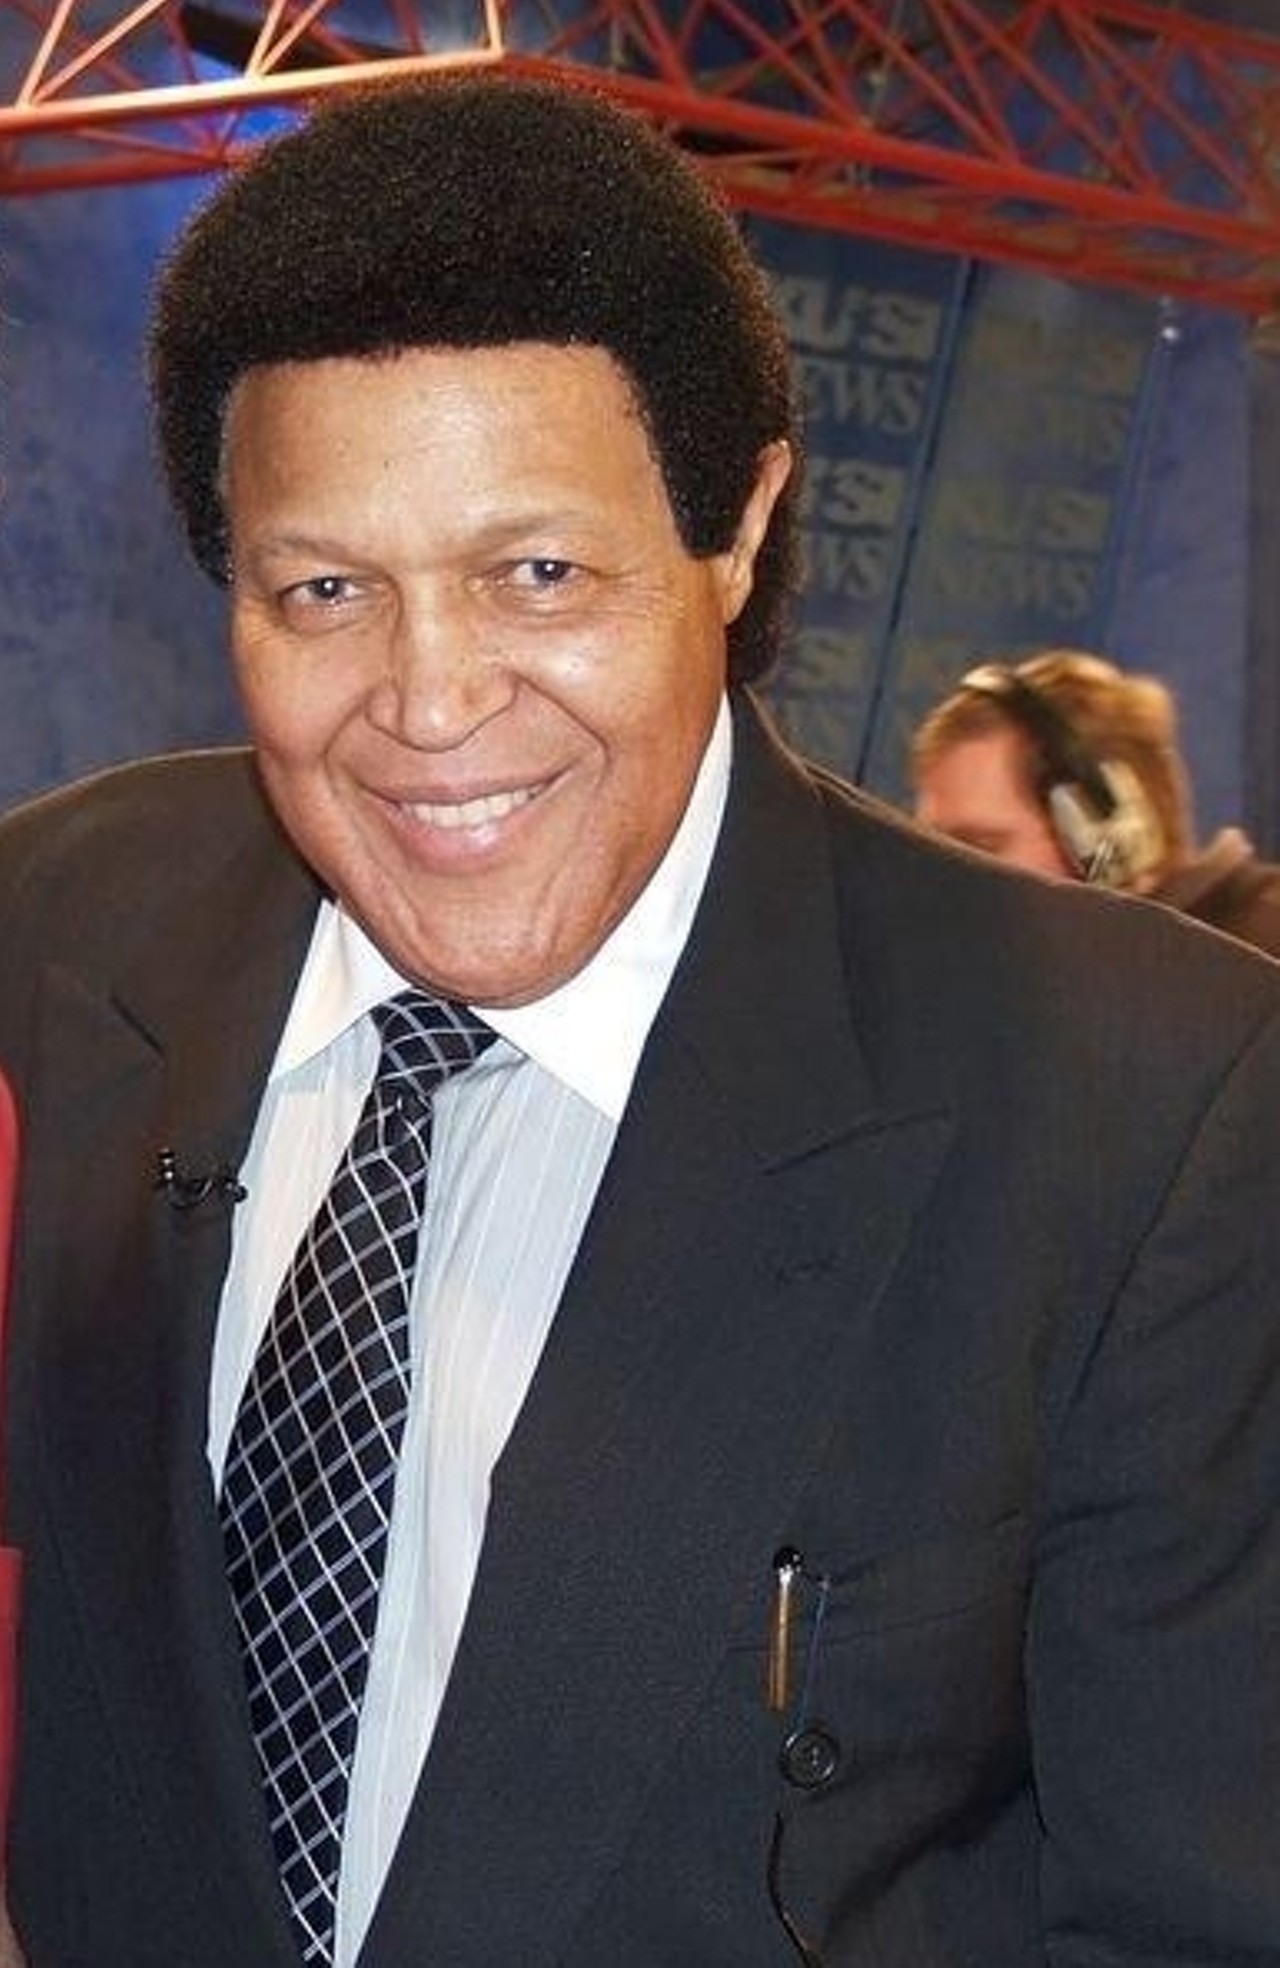 Most famous for his 1959 hit “The Twist,” singer Chubby Checker was recently in Cleveland for a couple days to promote tonight’s show at the Hard Rock Rocksino. (He also made a run out to Mentor where Chubby Snacks Beefy Jerky is produced.) Dubbed Rock and Roll to the Rescue, the show is a benefit concert designed to raise money for the Geauga County Humane Society’s Rescue Village. A groundbreaking musician who introduced dancing to the rock world, Checker broke down barriers. “All I knew is that everyone was dancing,” says Checker, who was in 11th grade when he started imitating artists such as Elvis Presley and the Everly Brothers. “We brought that to the dance floor and people weren’t even interested in what was going on socially. They just wanted to go out and have fun.” The show begins at 8 p.m. and tickets start at $25. (Niesel)